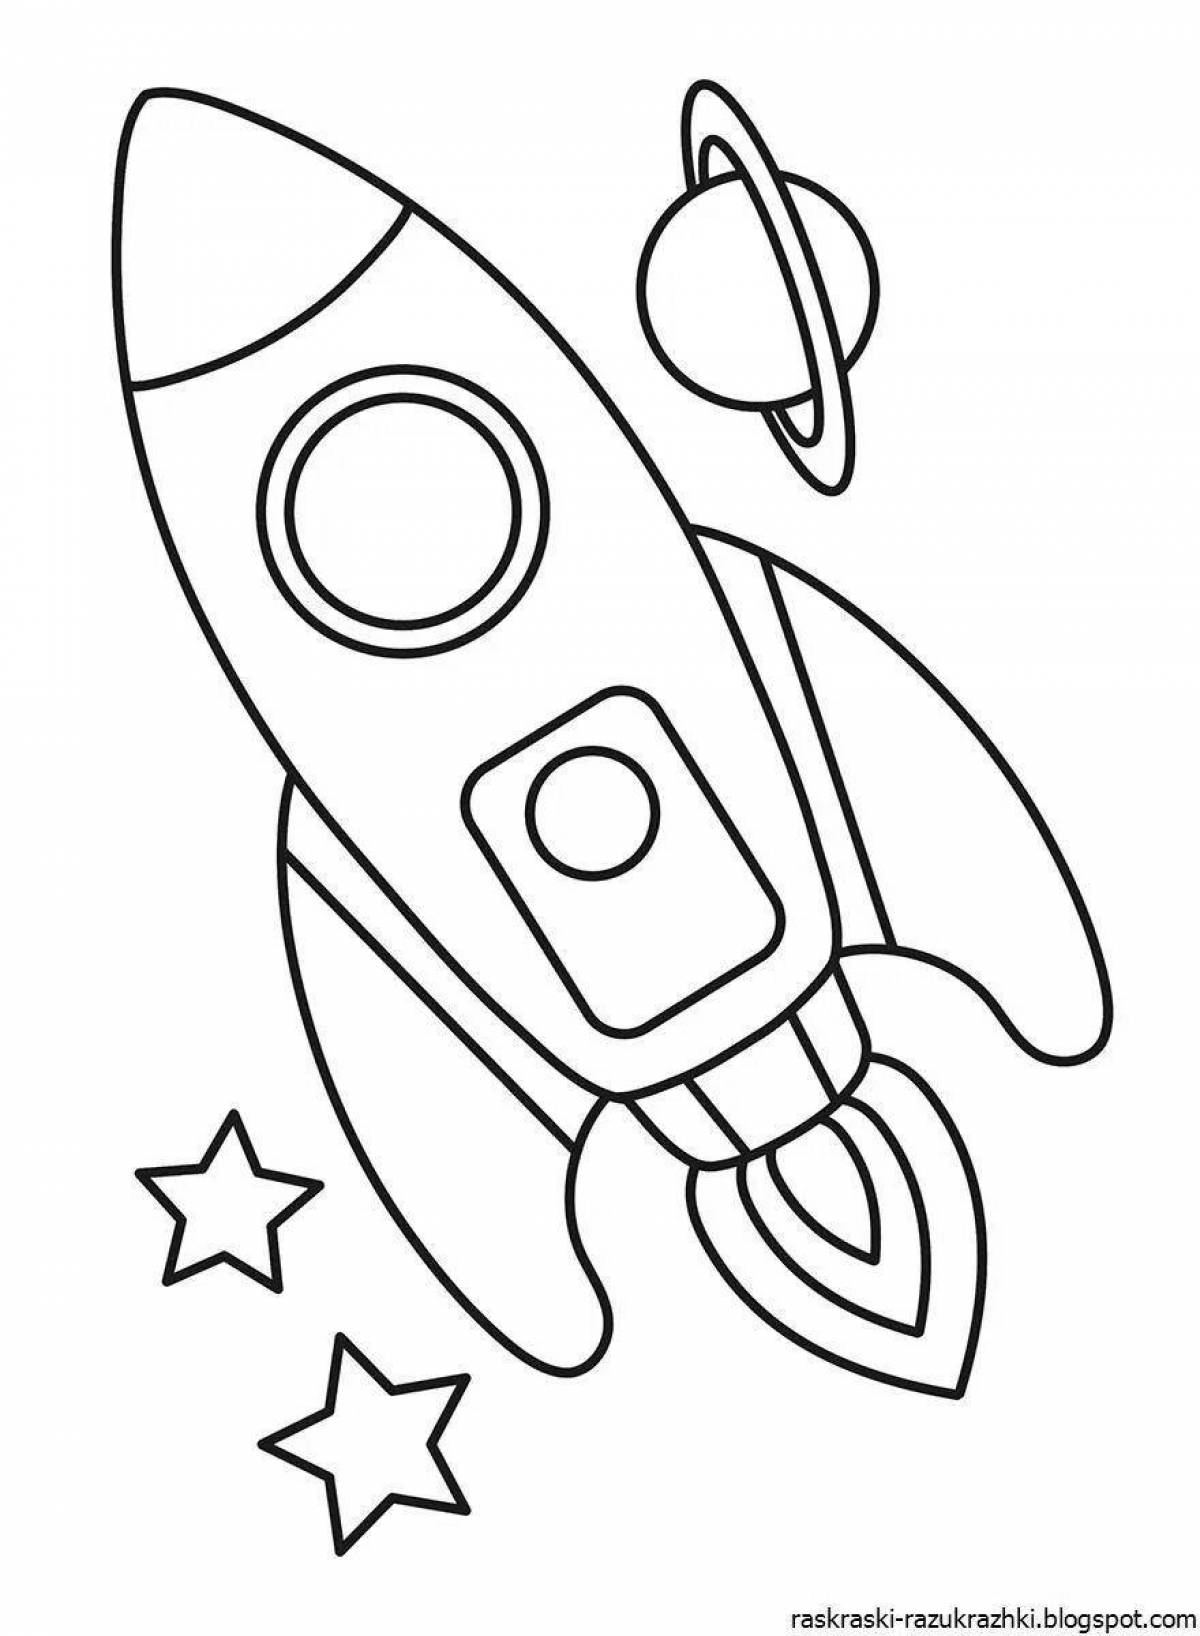 Sparkling Coloring Rocket for 4-5 year olds